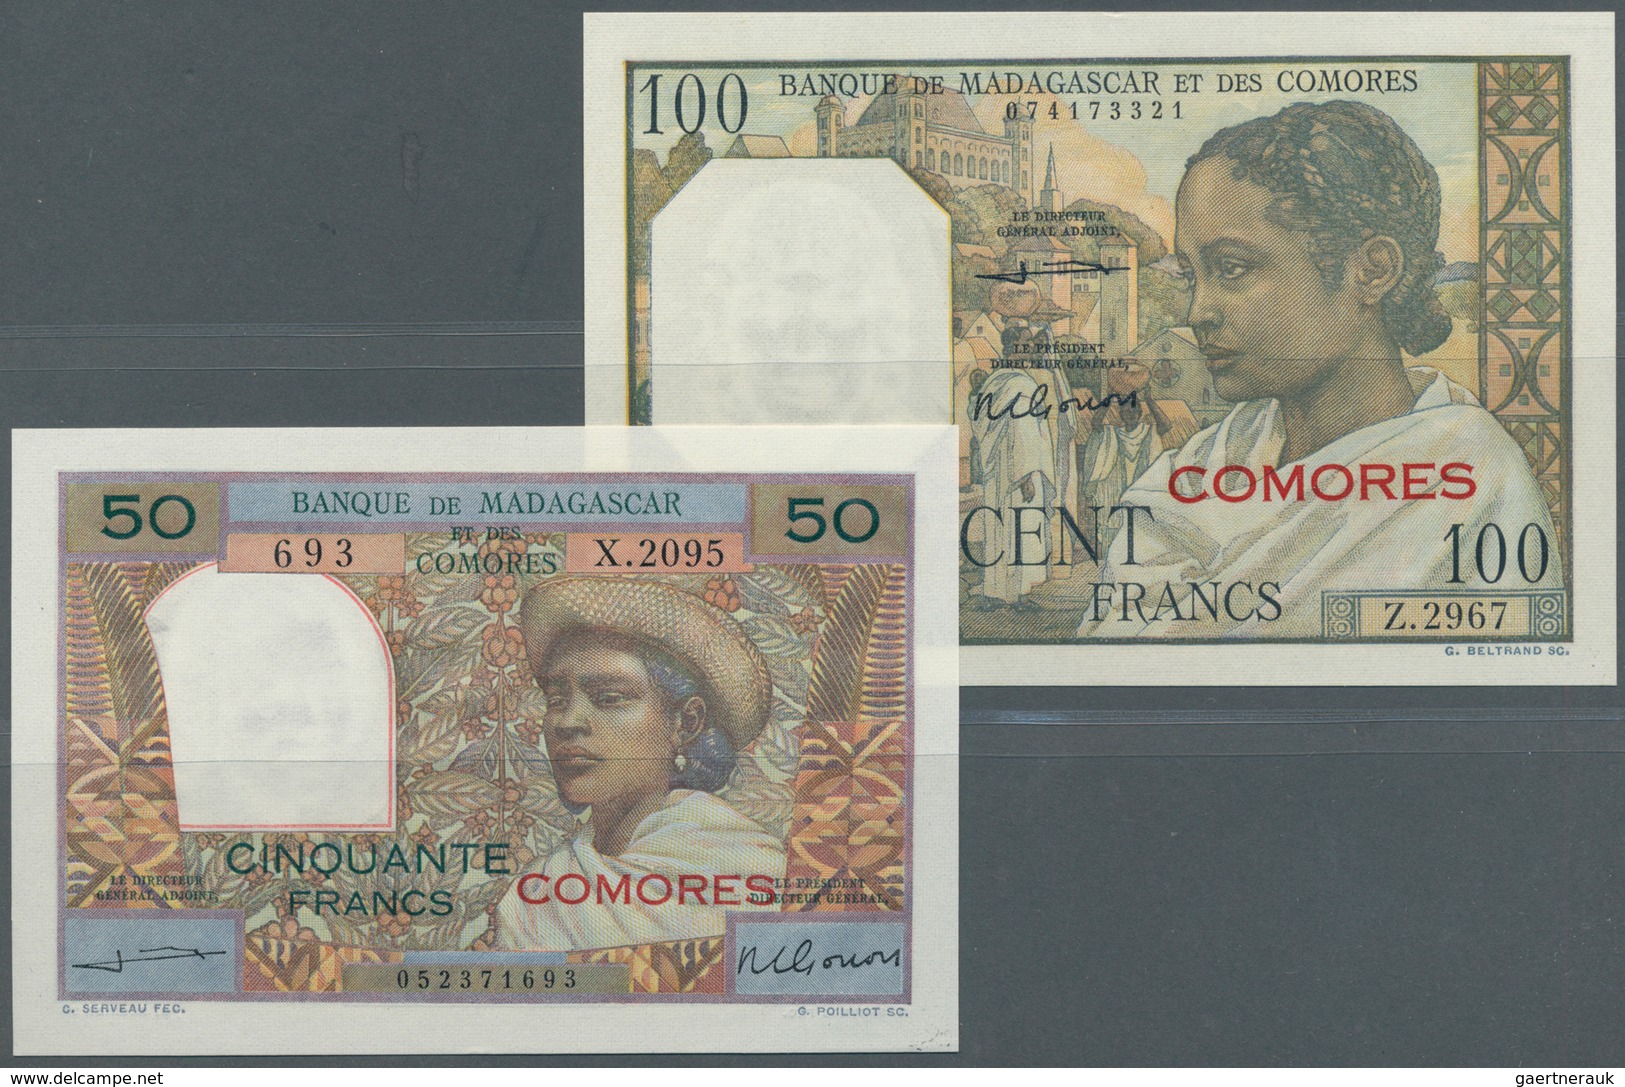 01316 Comoros / Komoren: Set Of 2 Banknotes Containing 50 And 100 Francs ND(1960-63), Both In Condition: U - Comores